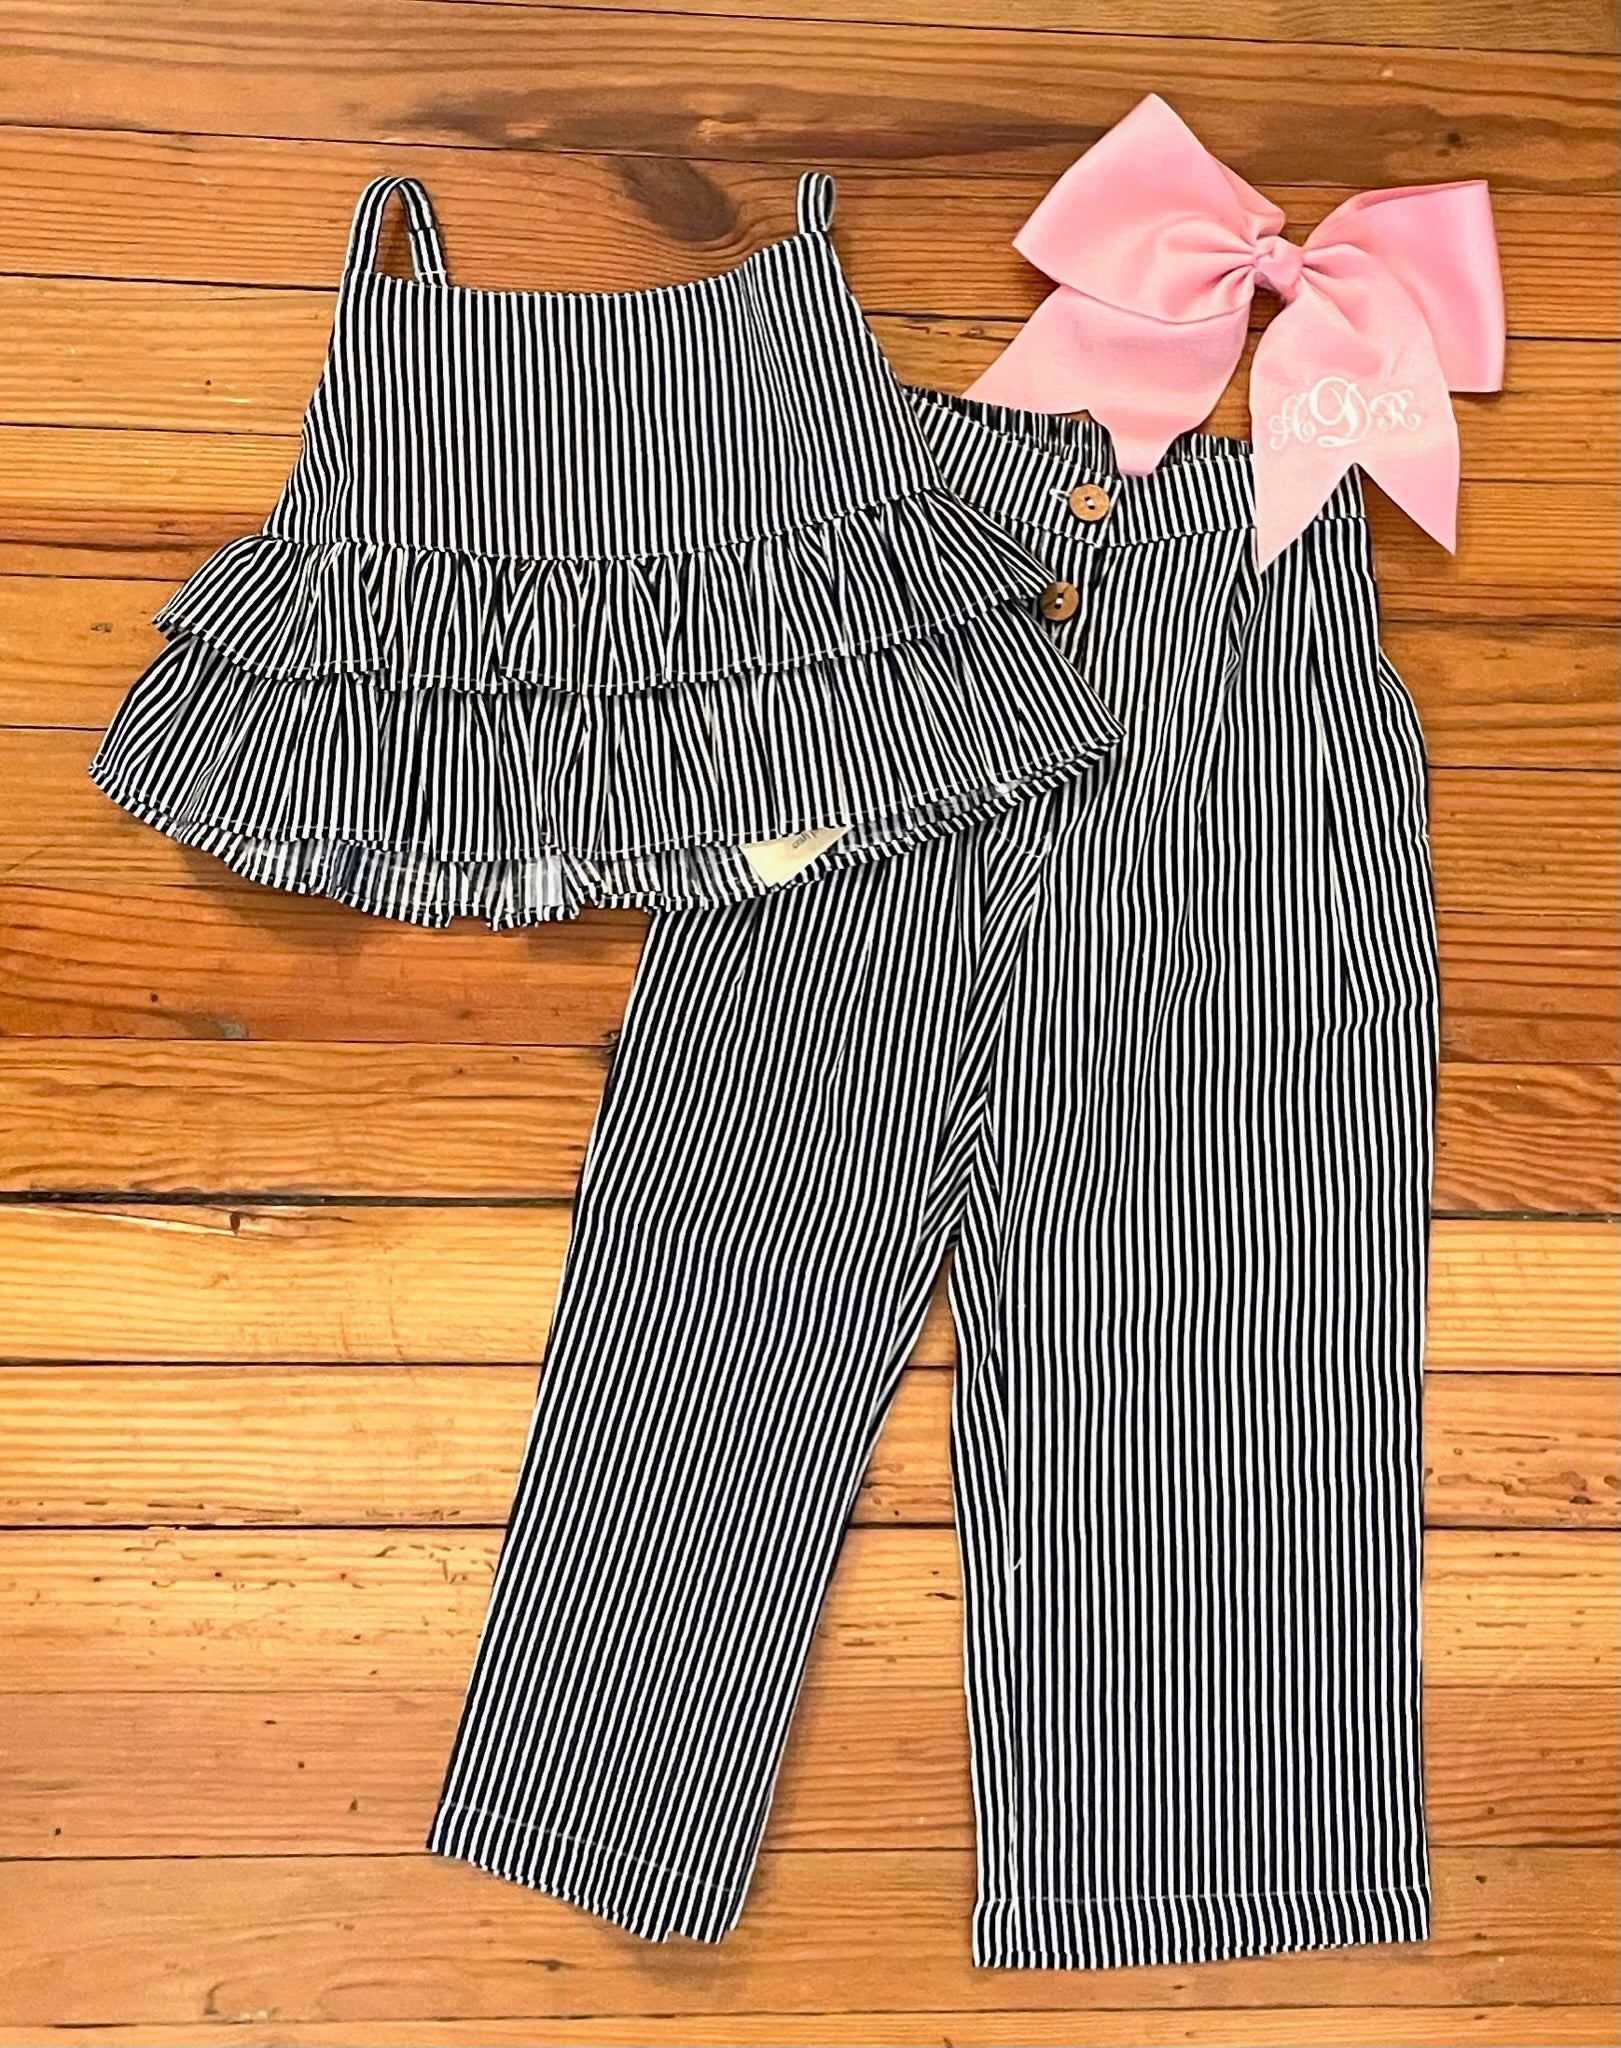 Toddler Girls Spaghetti Strap Ruffle Crop Top and Button Pants